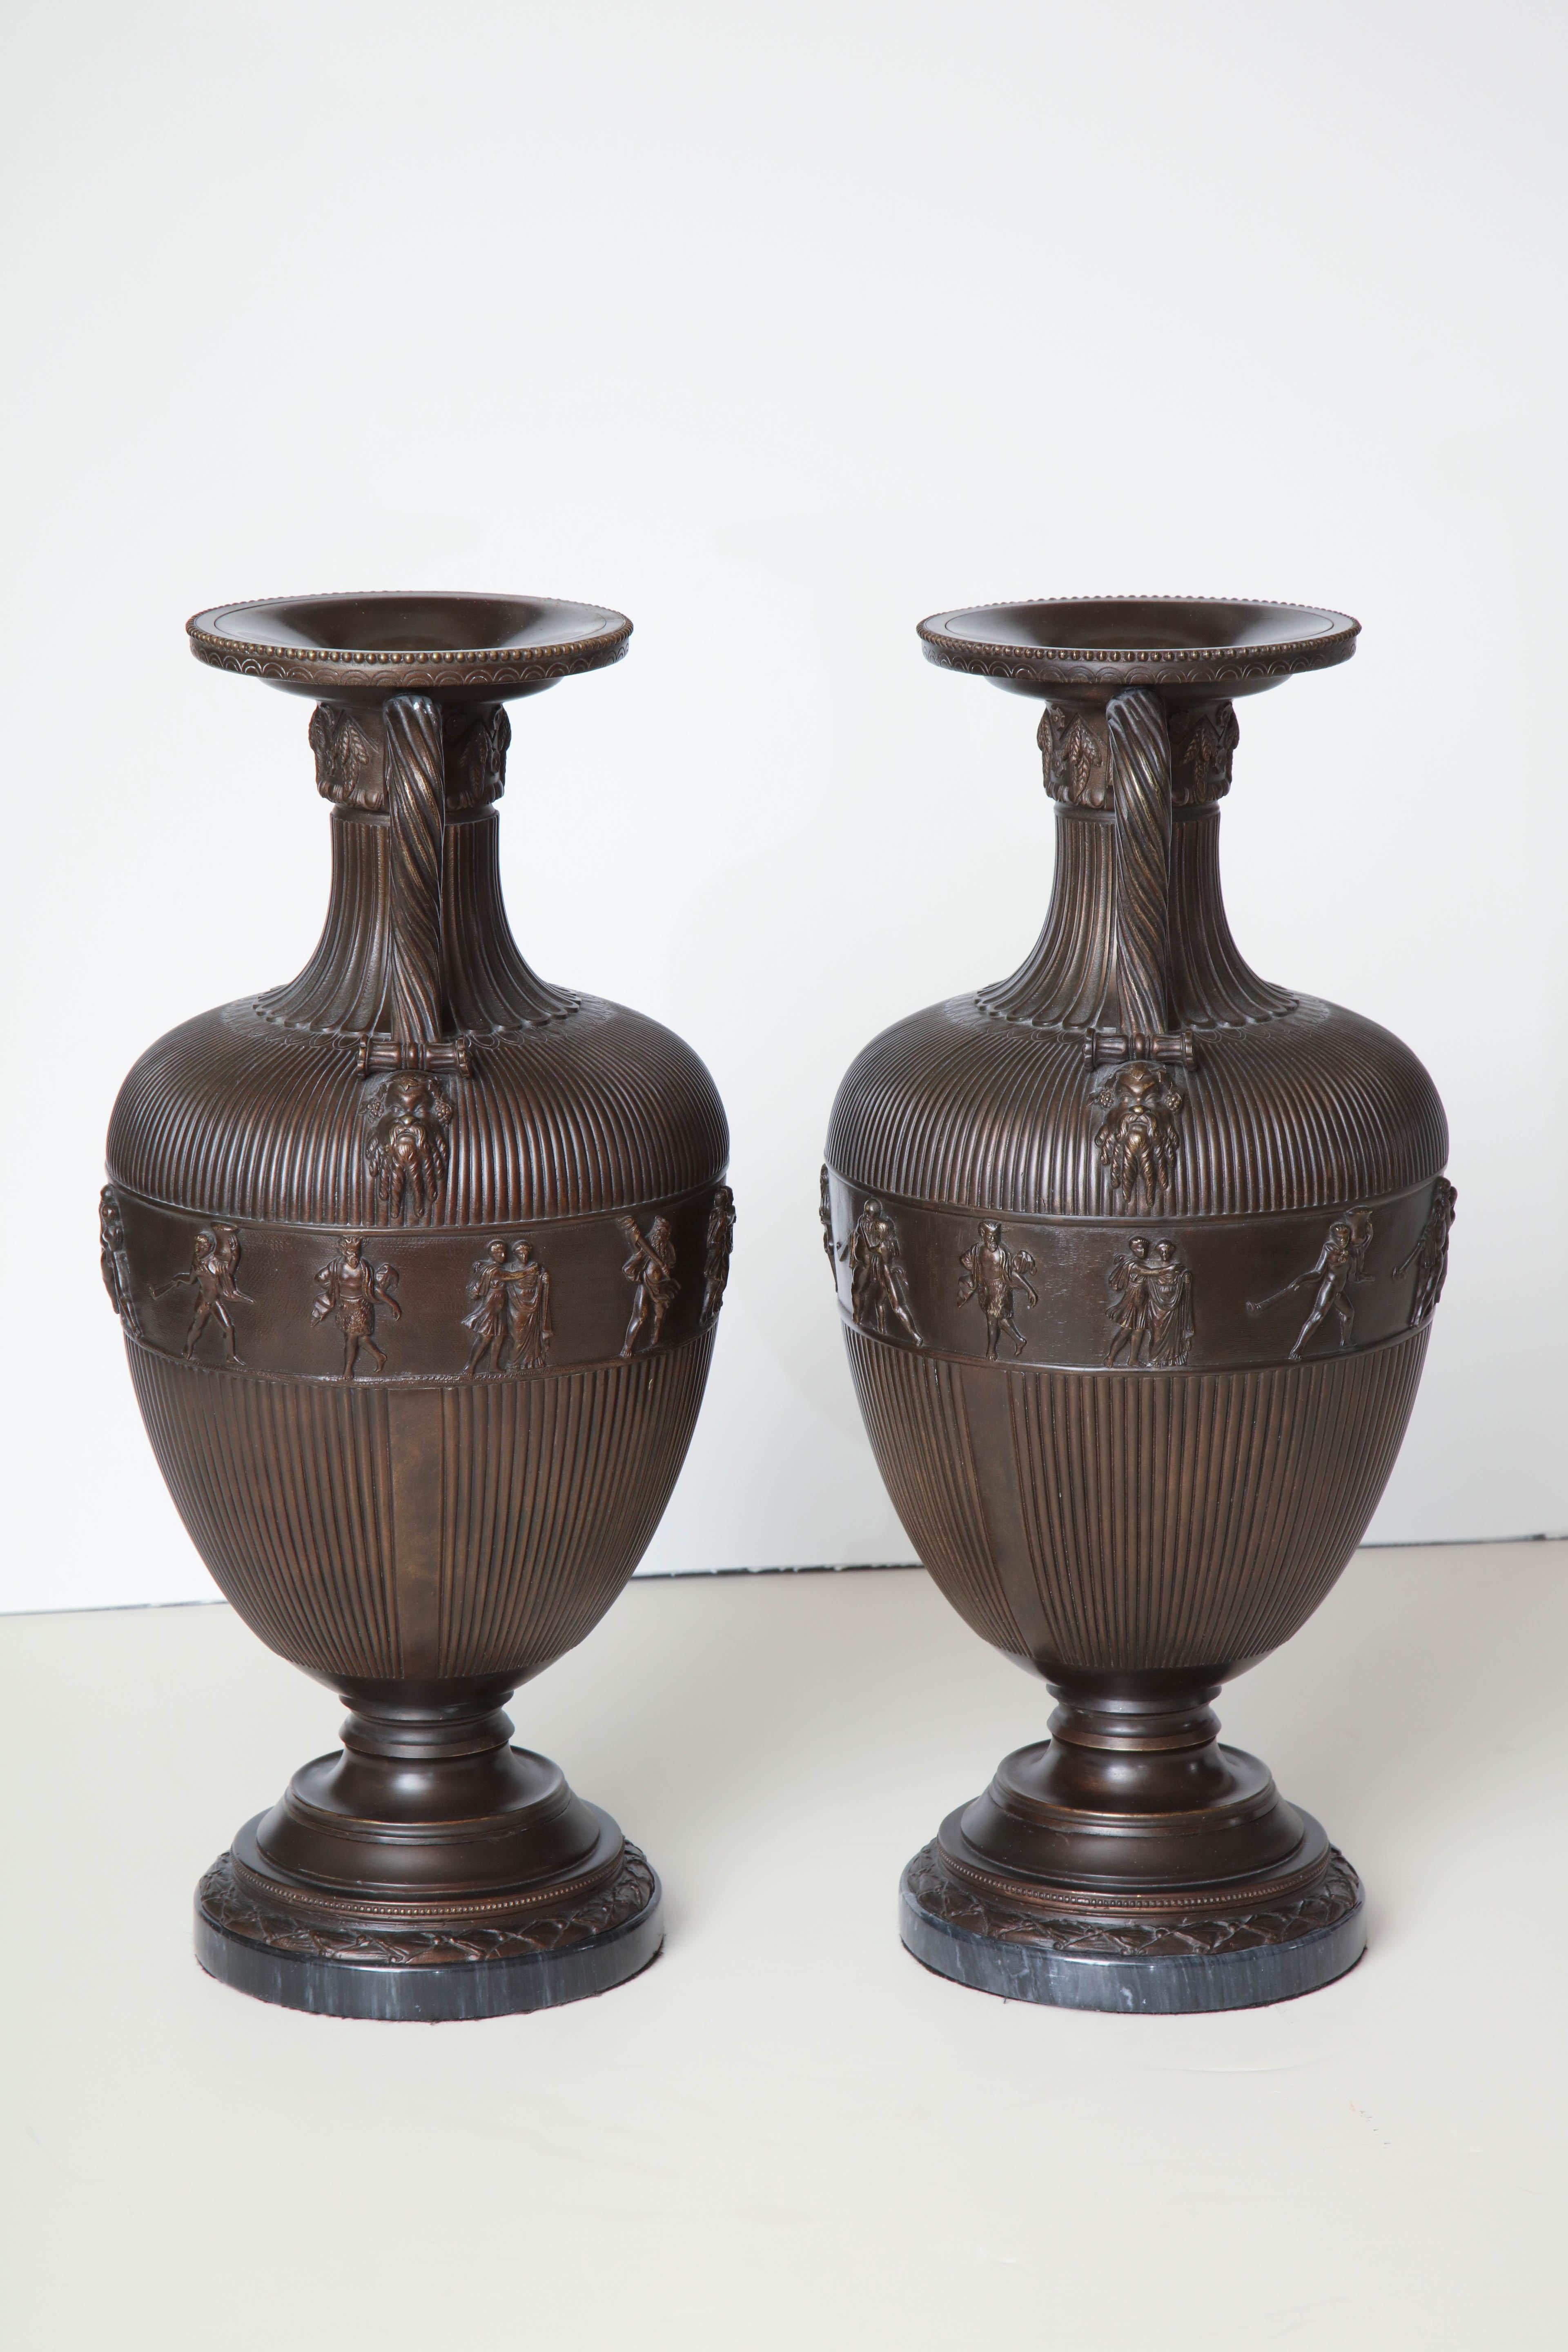 Pair of 19th Century Neoclassical, French, Bronze Urns on Marble Bases For Sale 6